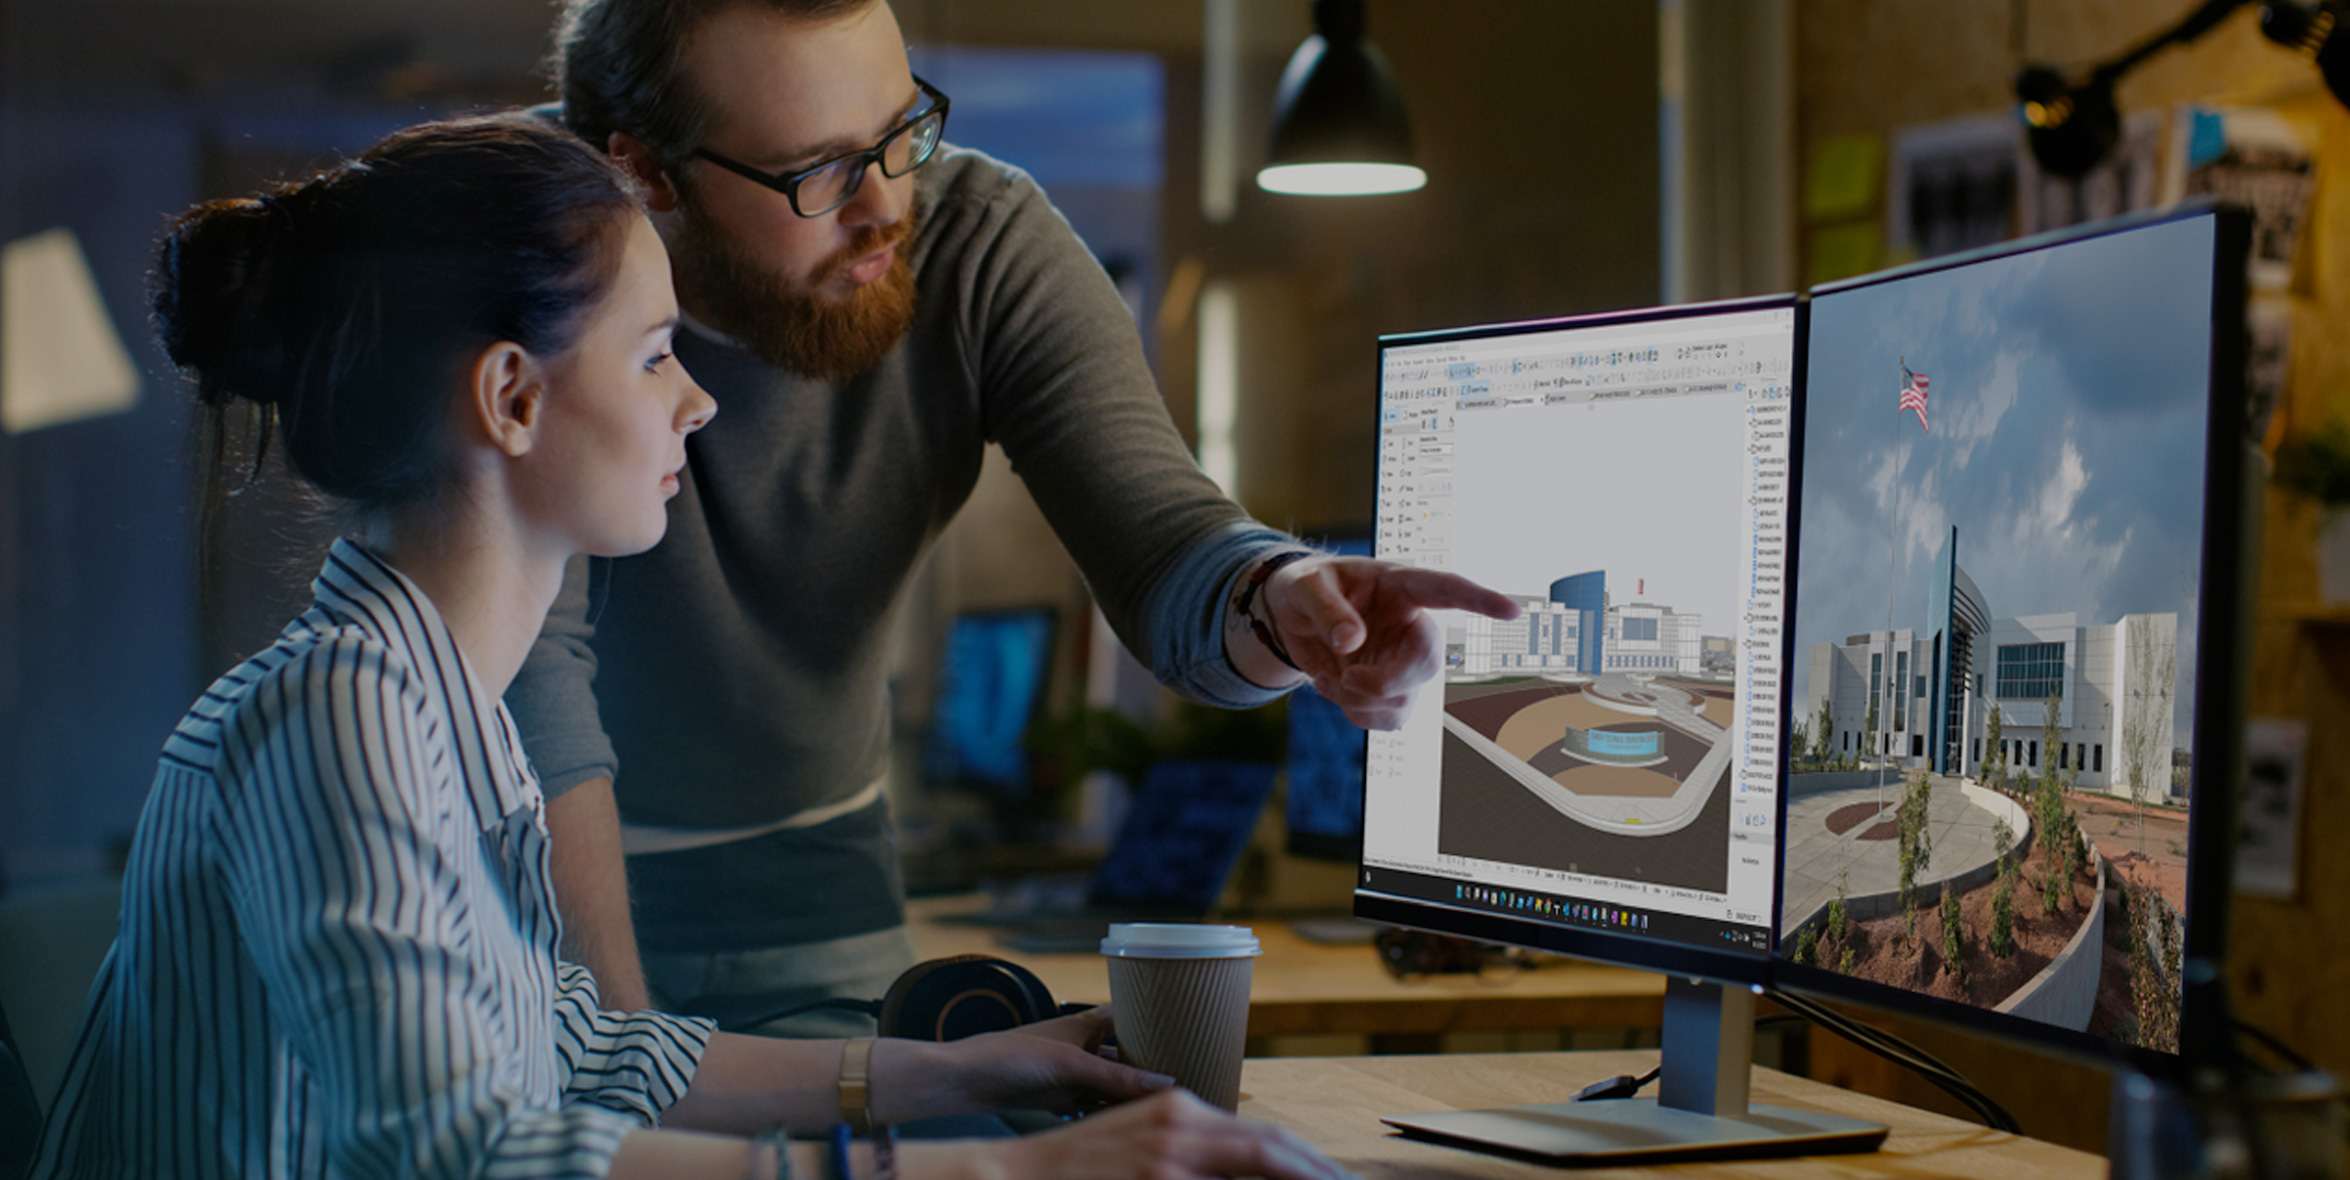 Bluebeam Revu and Archicad: The Secret Weapon for Design Collaboration